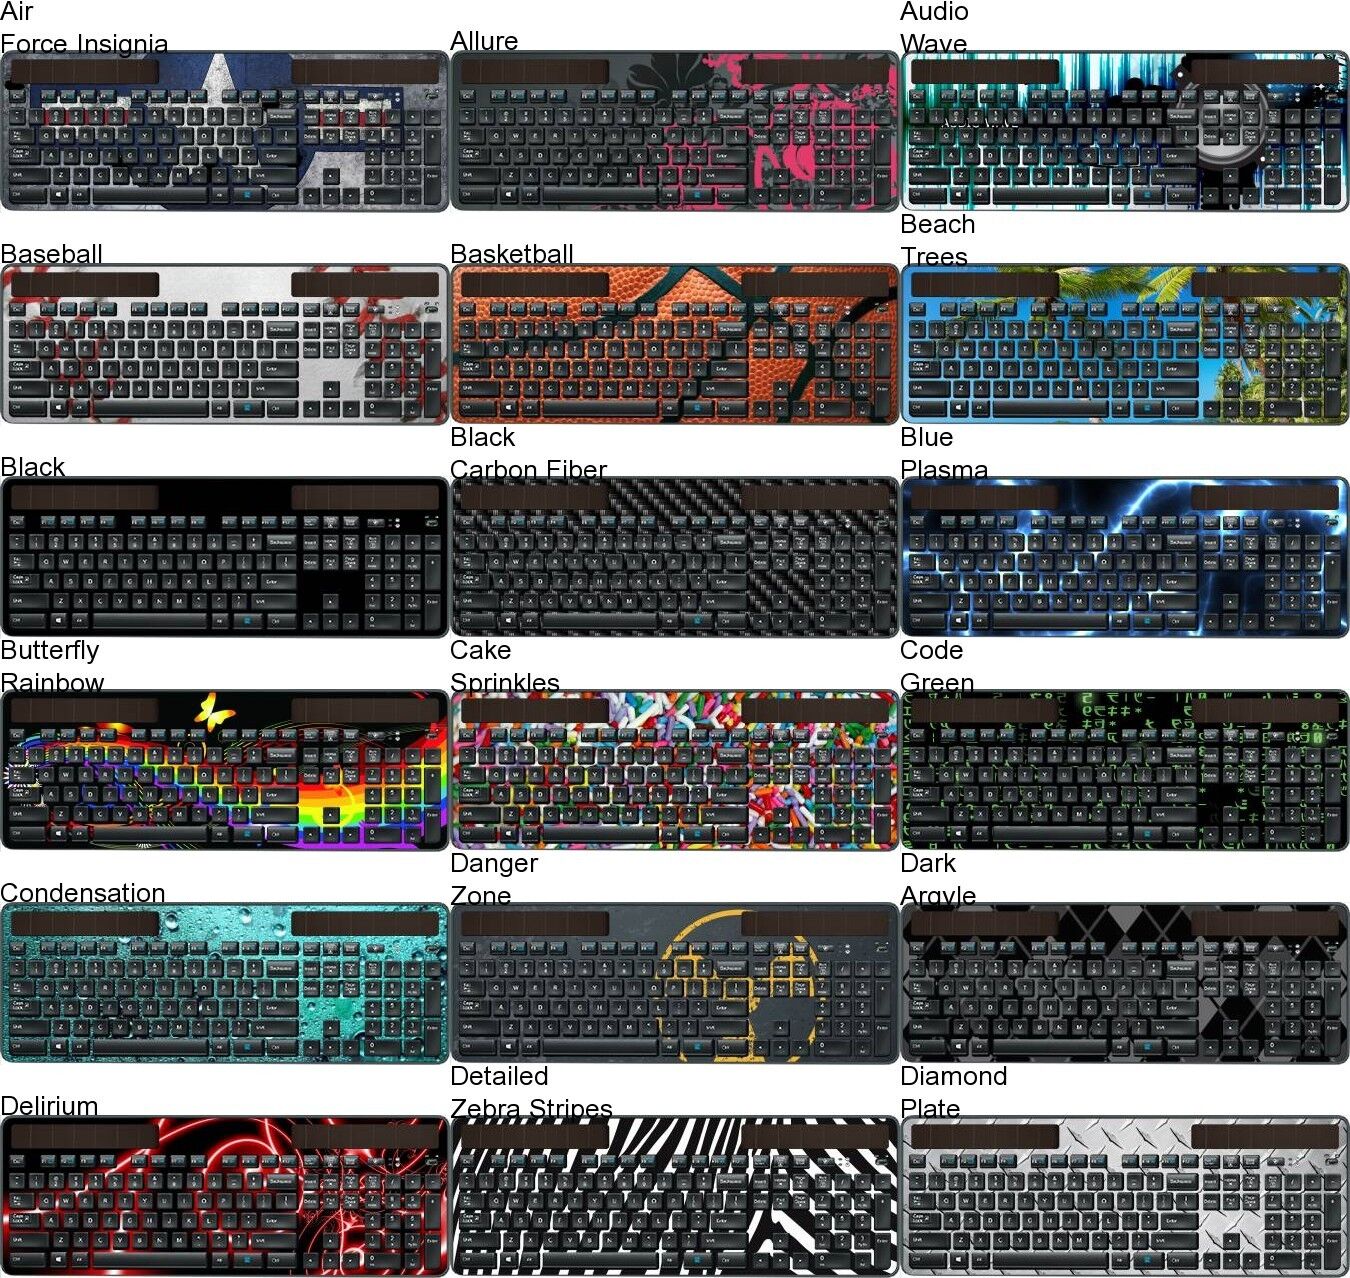 Choose Any 1 Vinyl Decal/Skin for Logitech K750 Keyboard PC - Free US Shipping